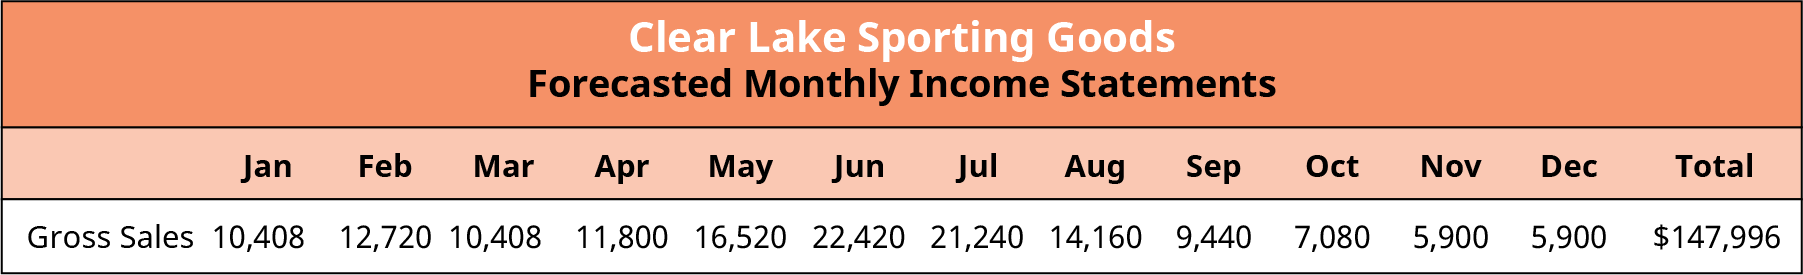 Adjusted Forecasted Sales Data for Clear Lake Sporting Goods shows a 2% reduction in estimated sales for the first quarter. Estimated sales for the remaining months are the same as they were in Figure 18.9. The estimated sales for all of the months are added together for the total estimated sales for the year.